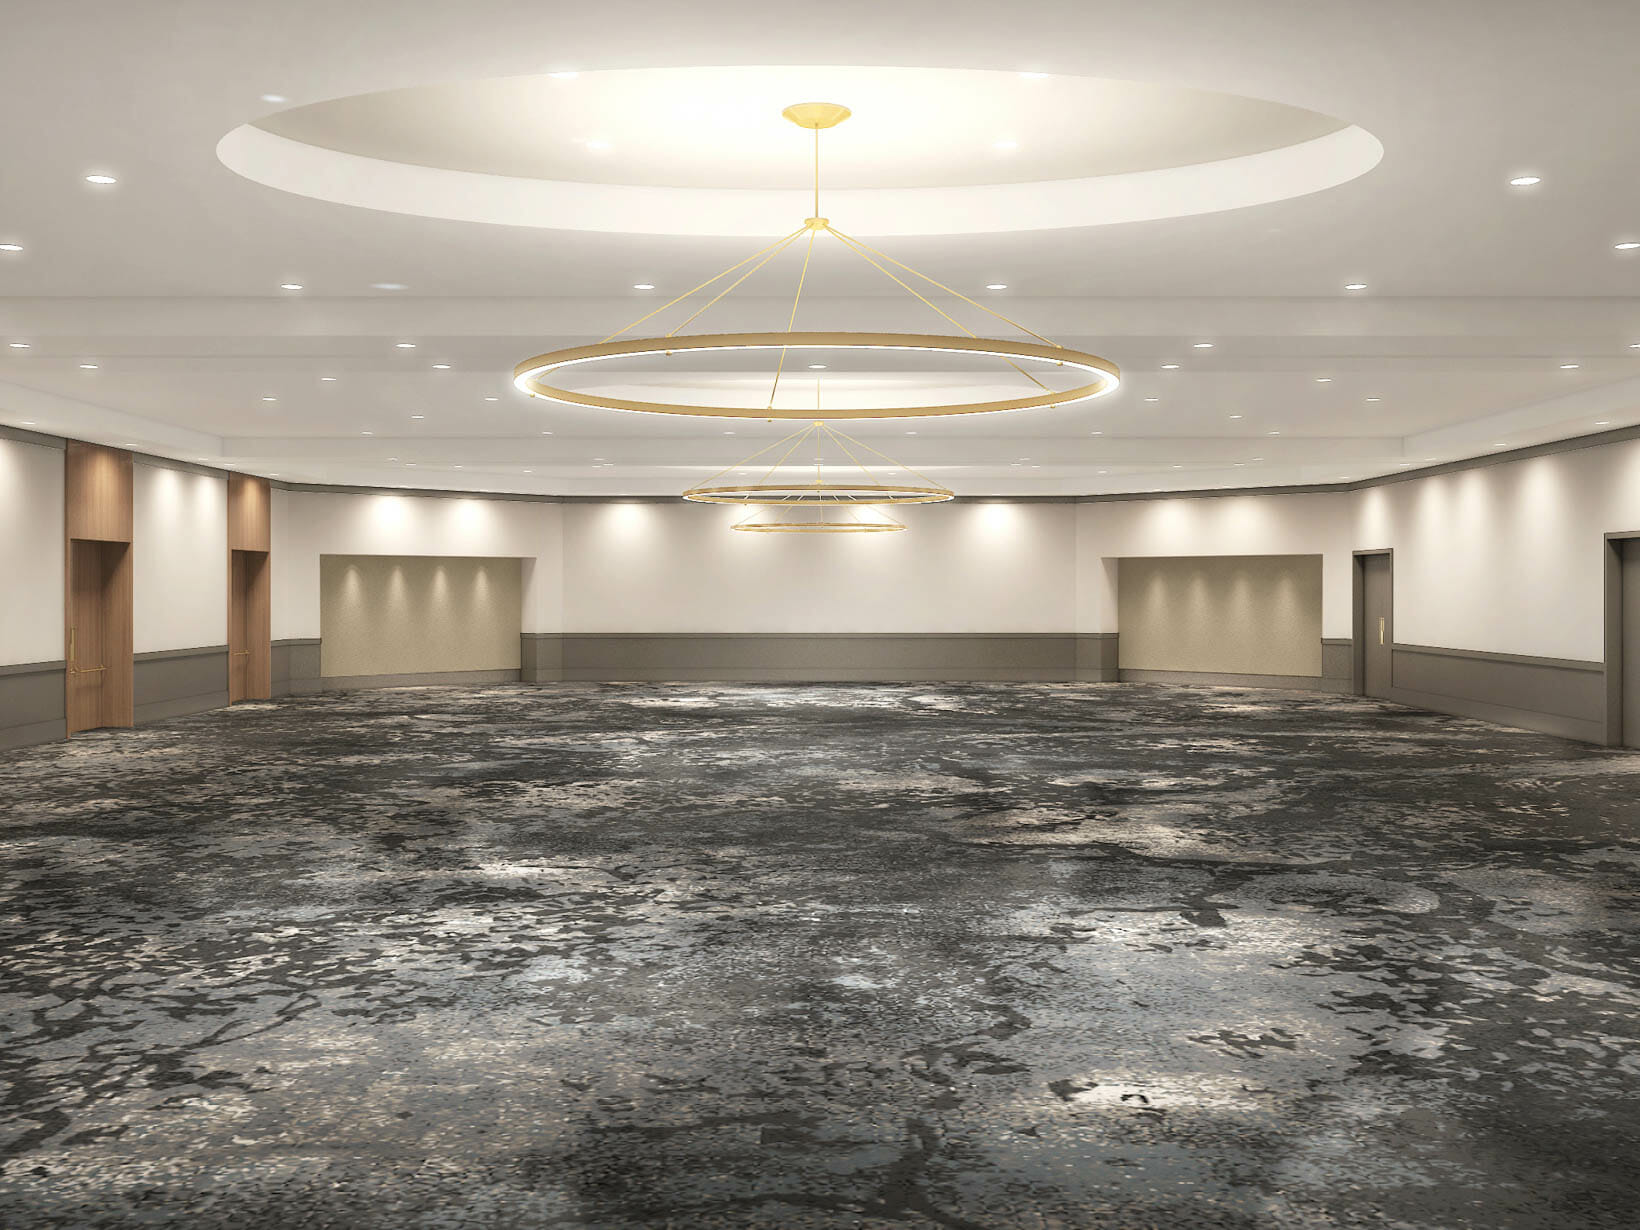 Empty meeting space with grey carpet, high ceilings, and circular chandeliers